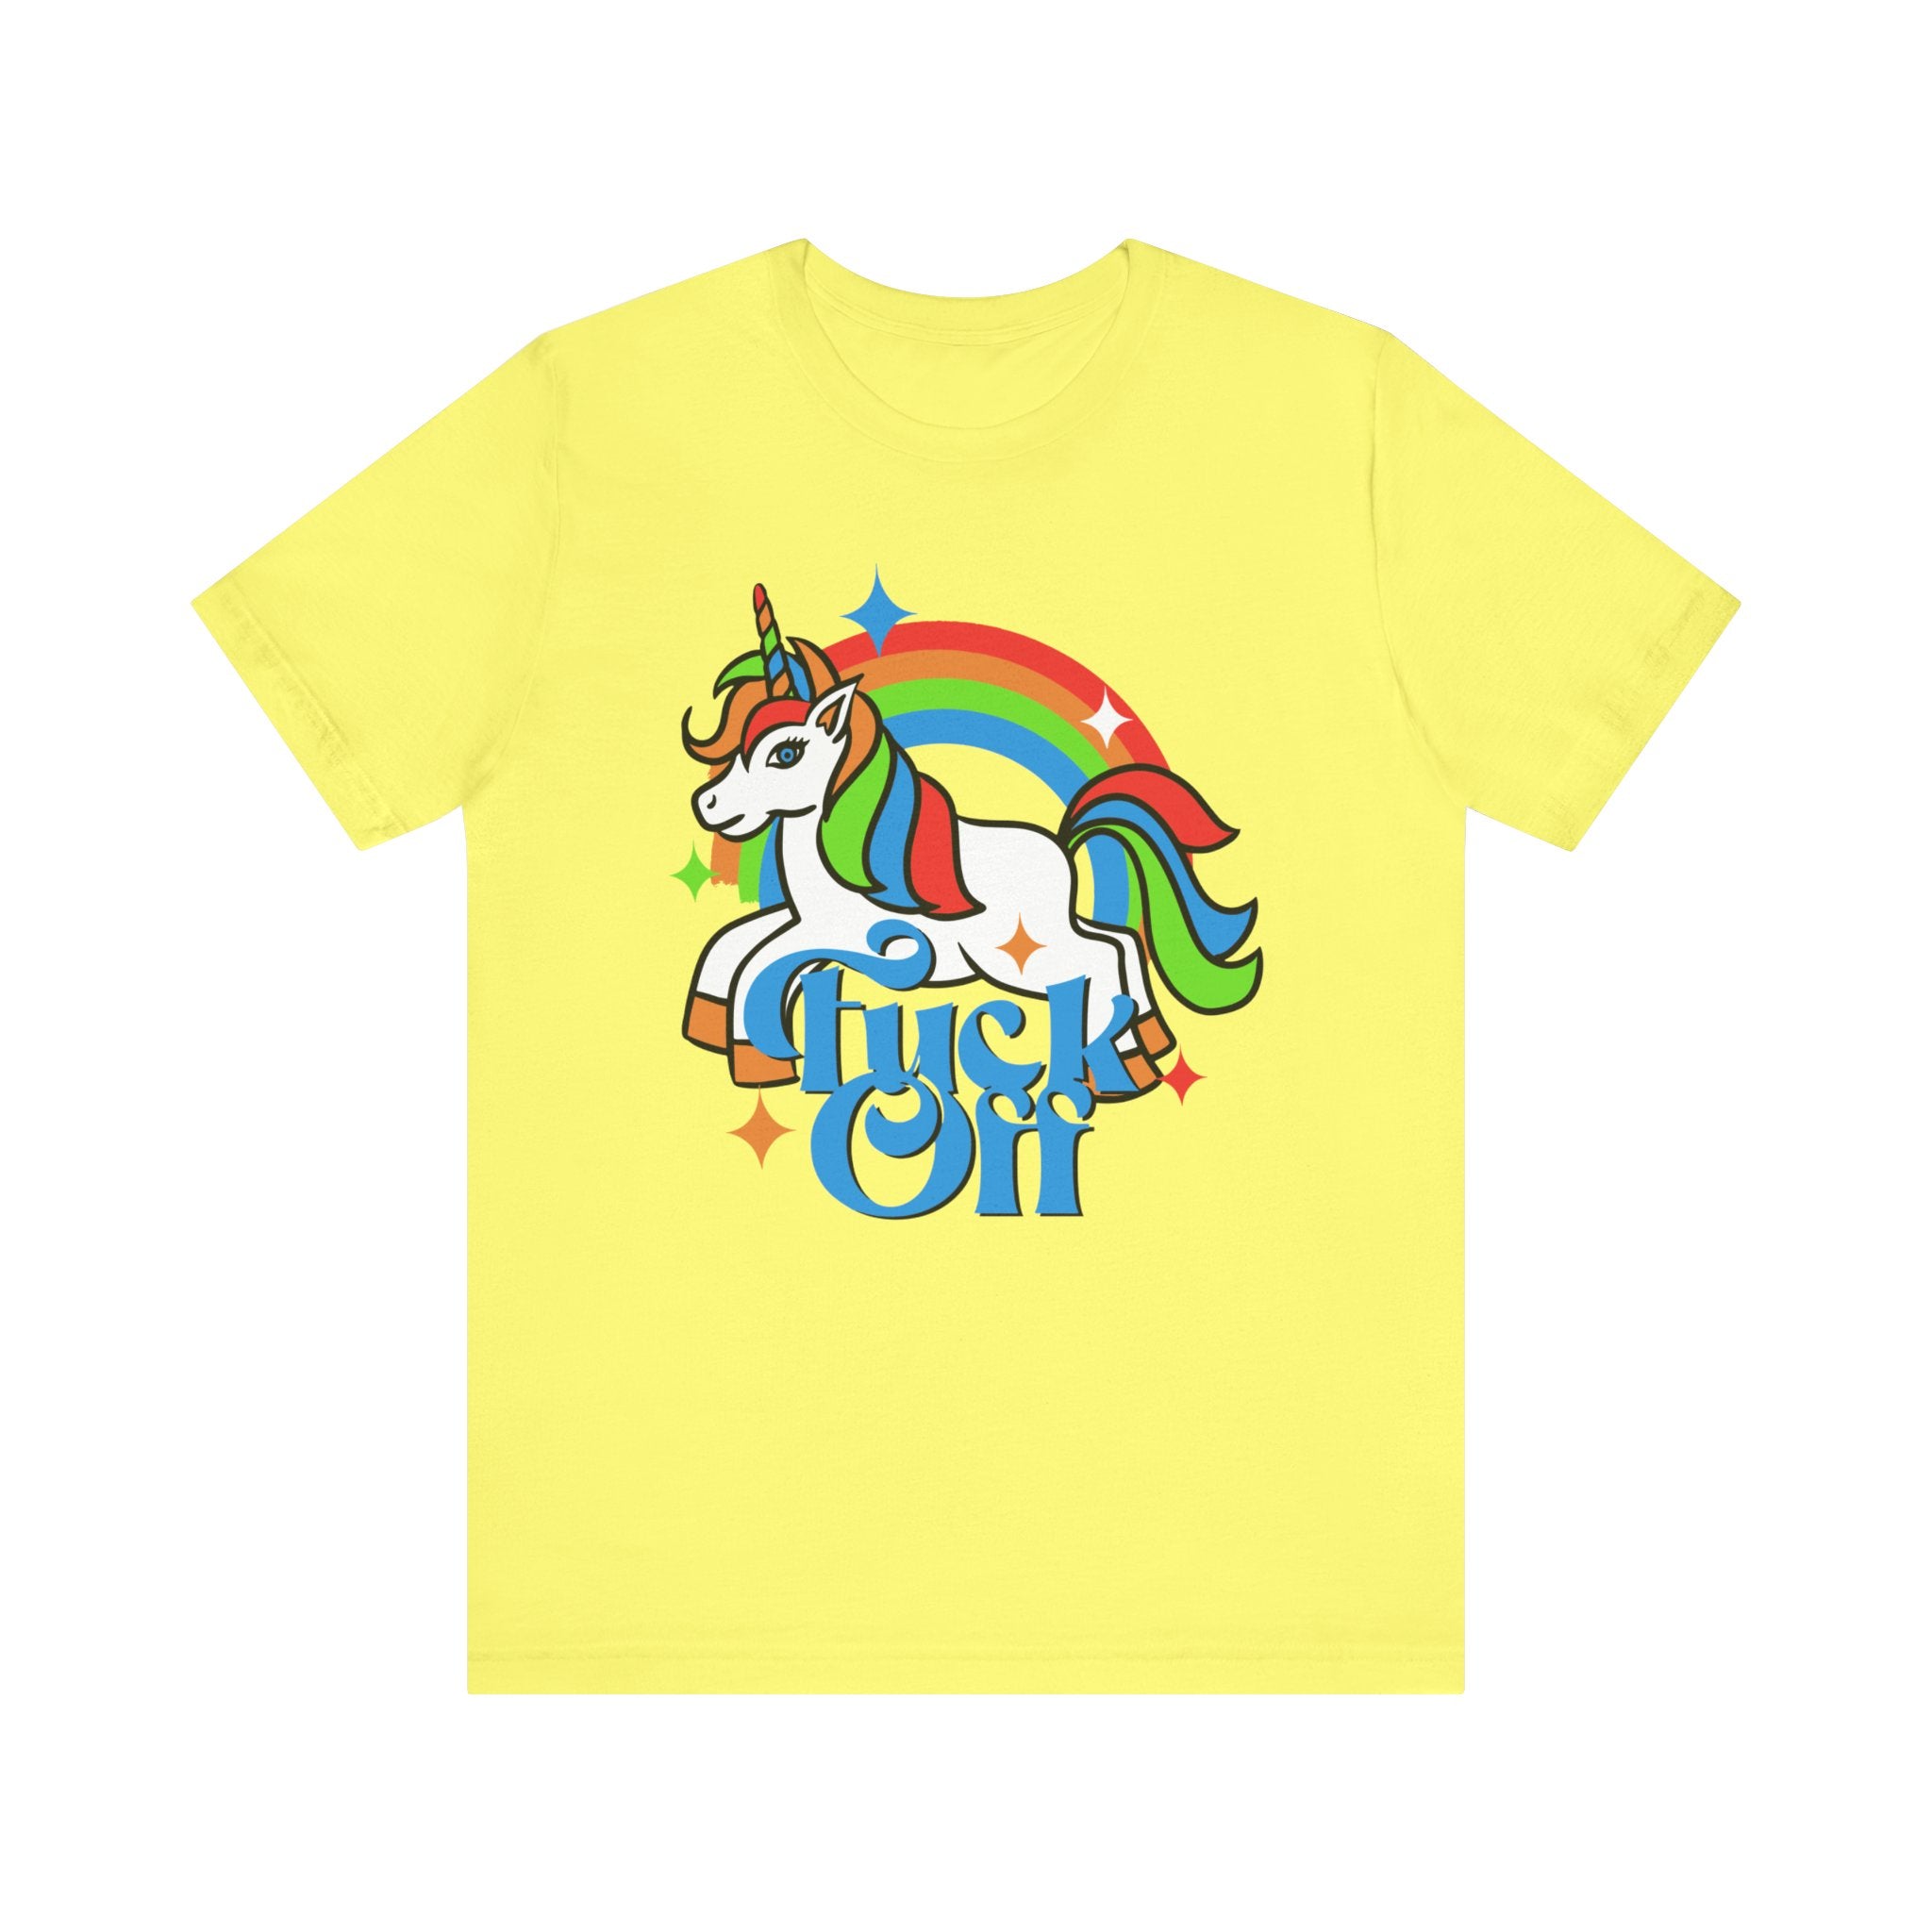 Revised Sentence: Yellow F off T-Shirt with a graphic of a white unicorn and a rainbow mane, surrounded by stars and the text "cheer up" in blue.